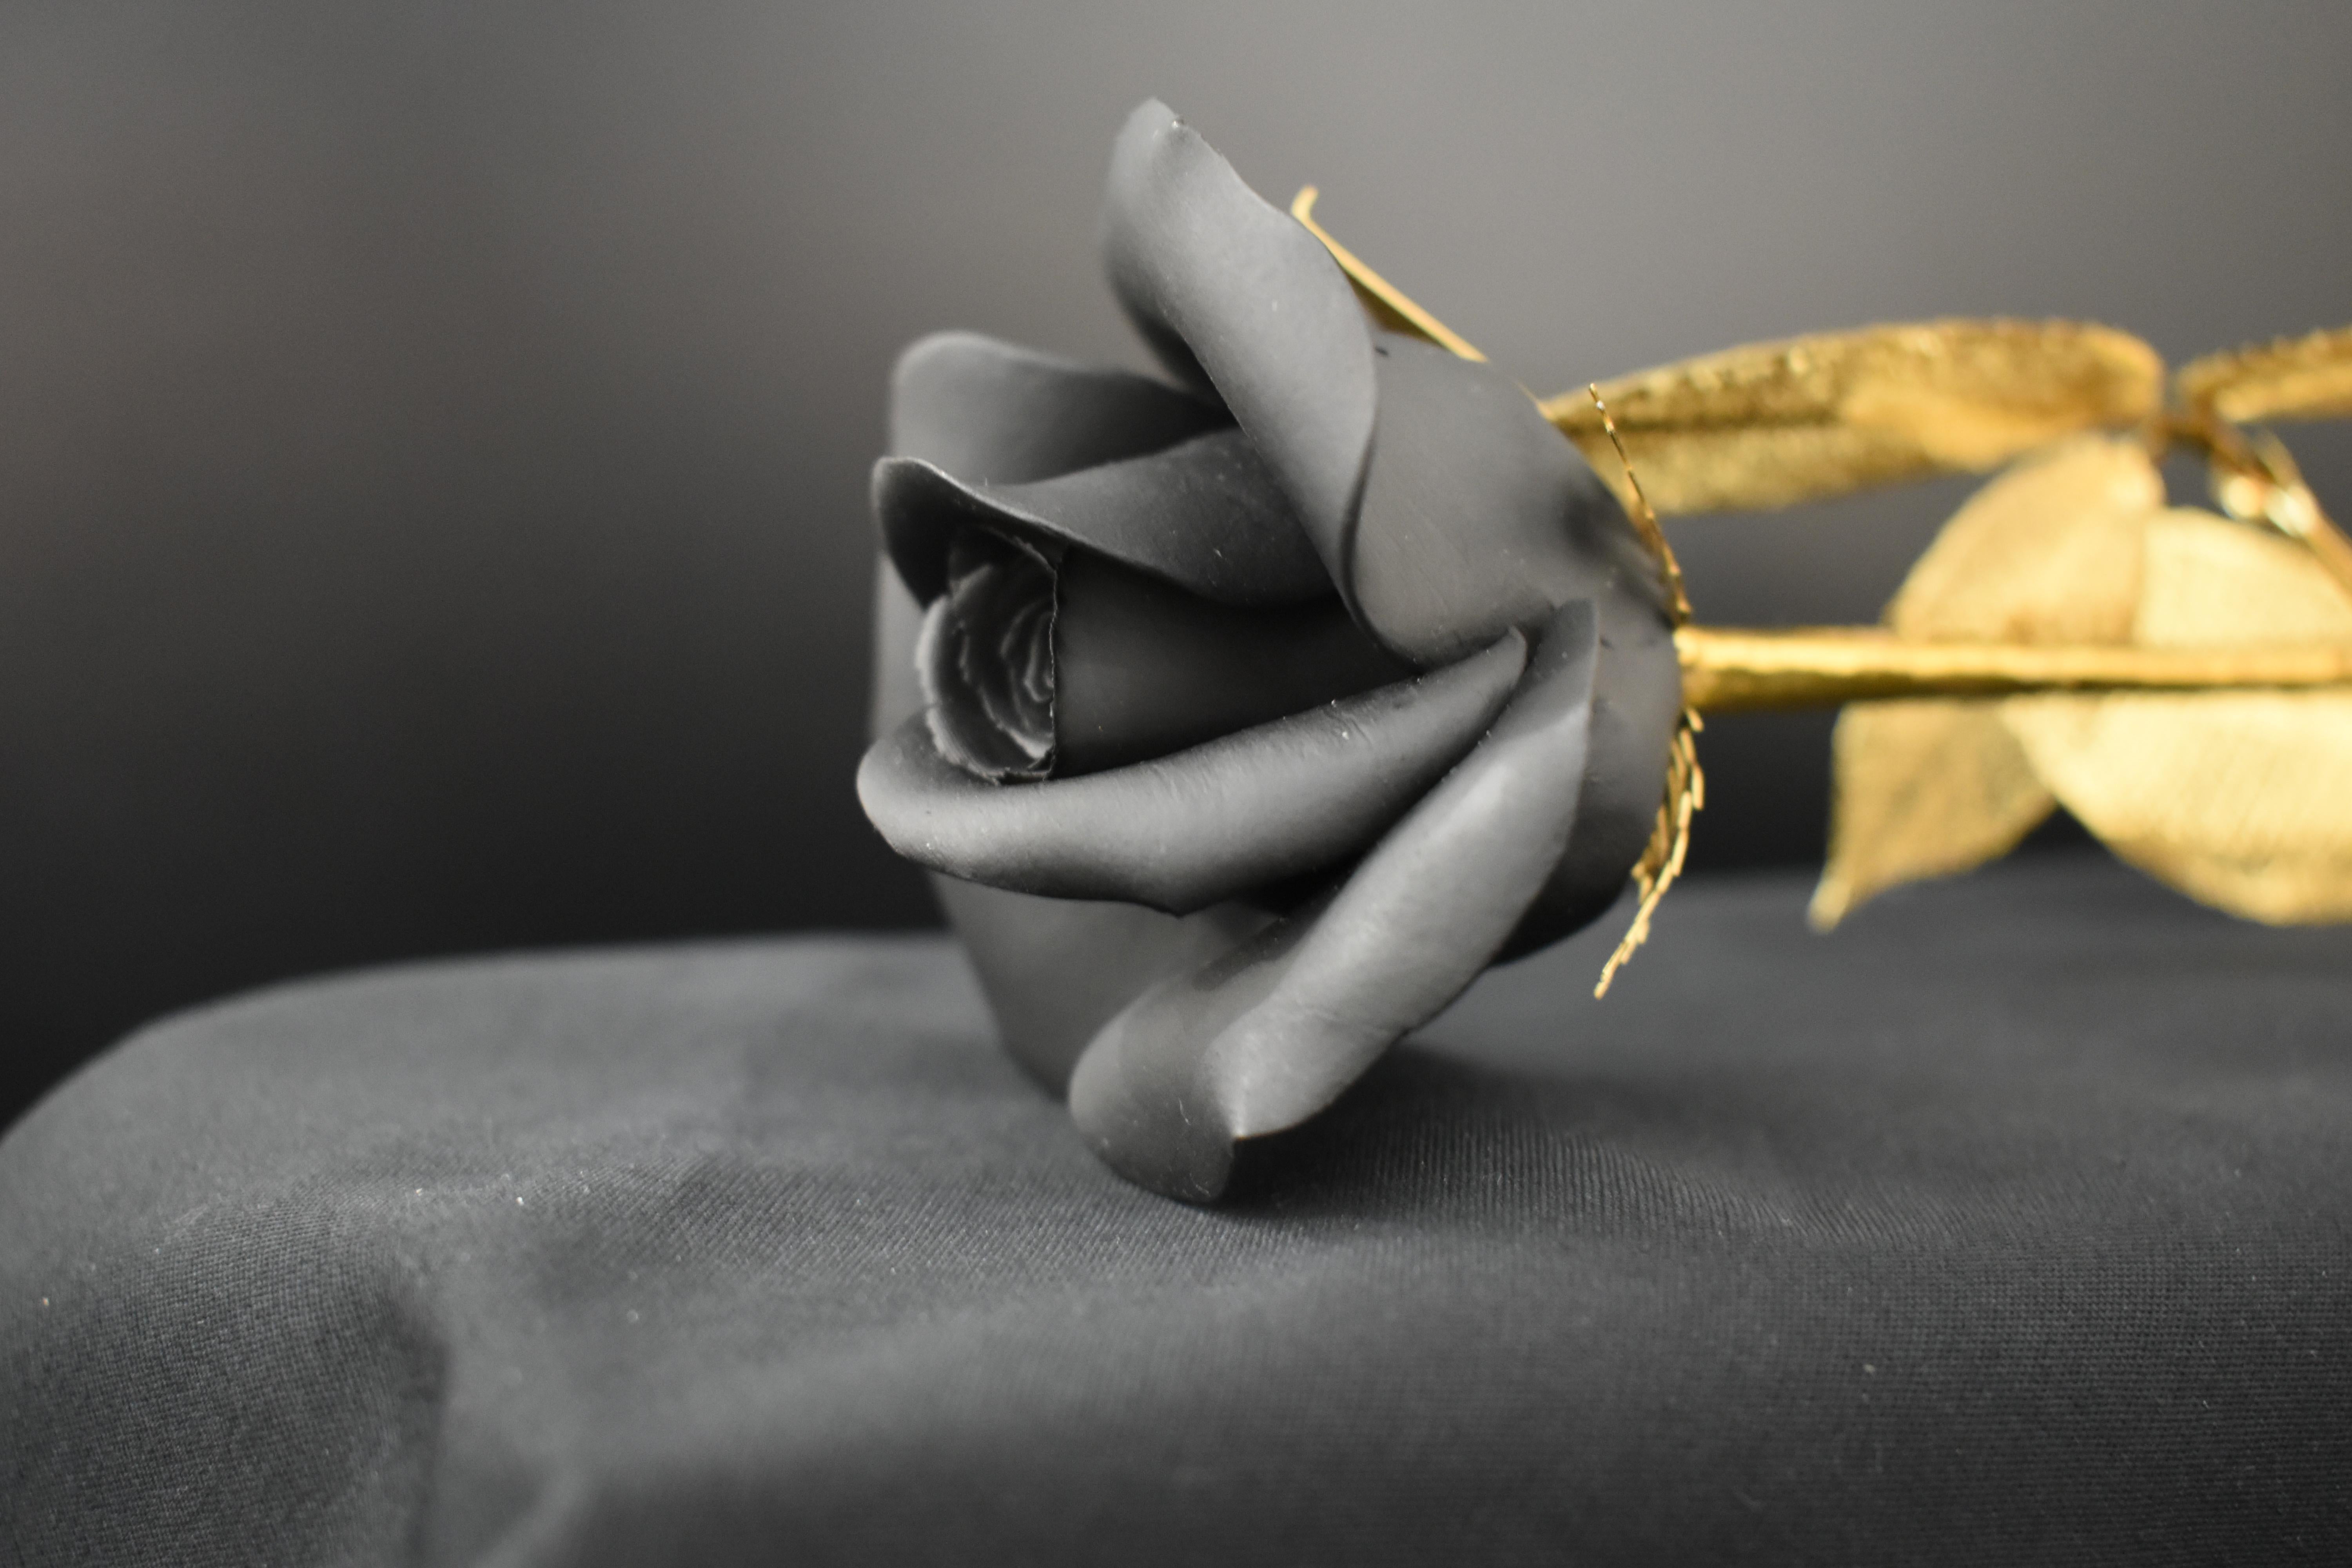 Rose Sculpture in Ceramic & Steel With A Delicate Gift Box, Black & Gold Color